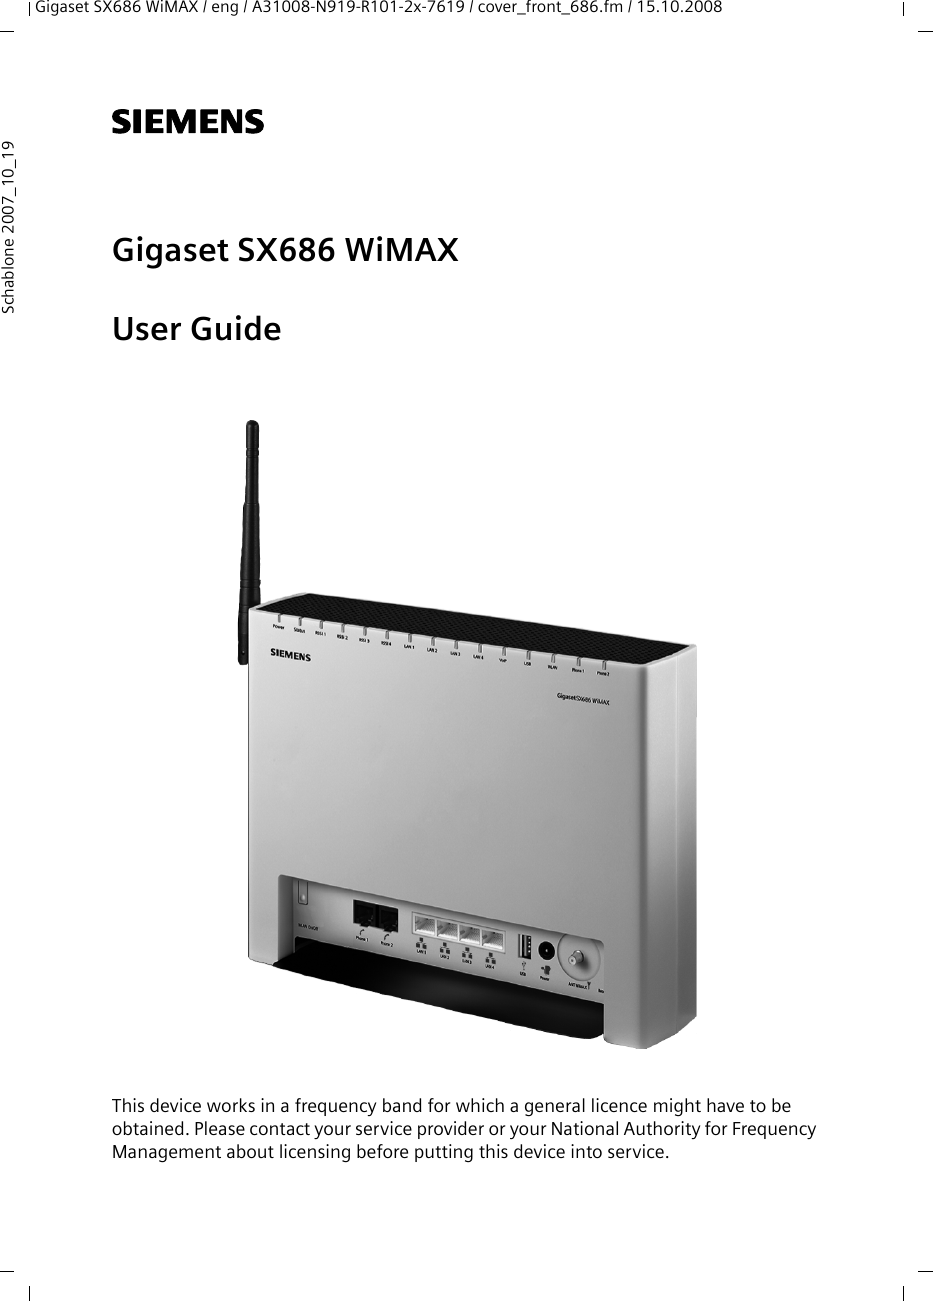 Gigaset SX686 WiMAX / eng / A31008-N919-R101-2x-7619 / cover_front_686.fm / 15.10.2008Schablone 2007_10_19s Gigaset SX686 WiMAXUser GuideThis device works in a frequency band for which a general licence might have to be obtained. Please contact your service provider or your National Authority for Frequency Management about licensing before putting this device into service.